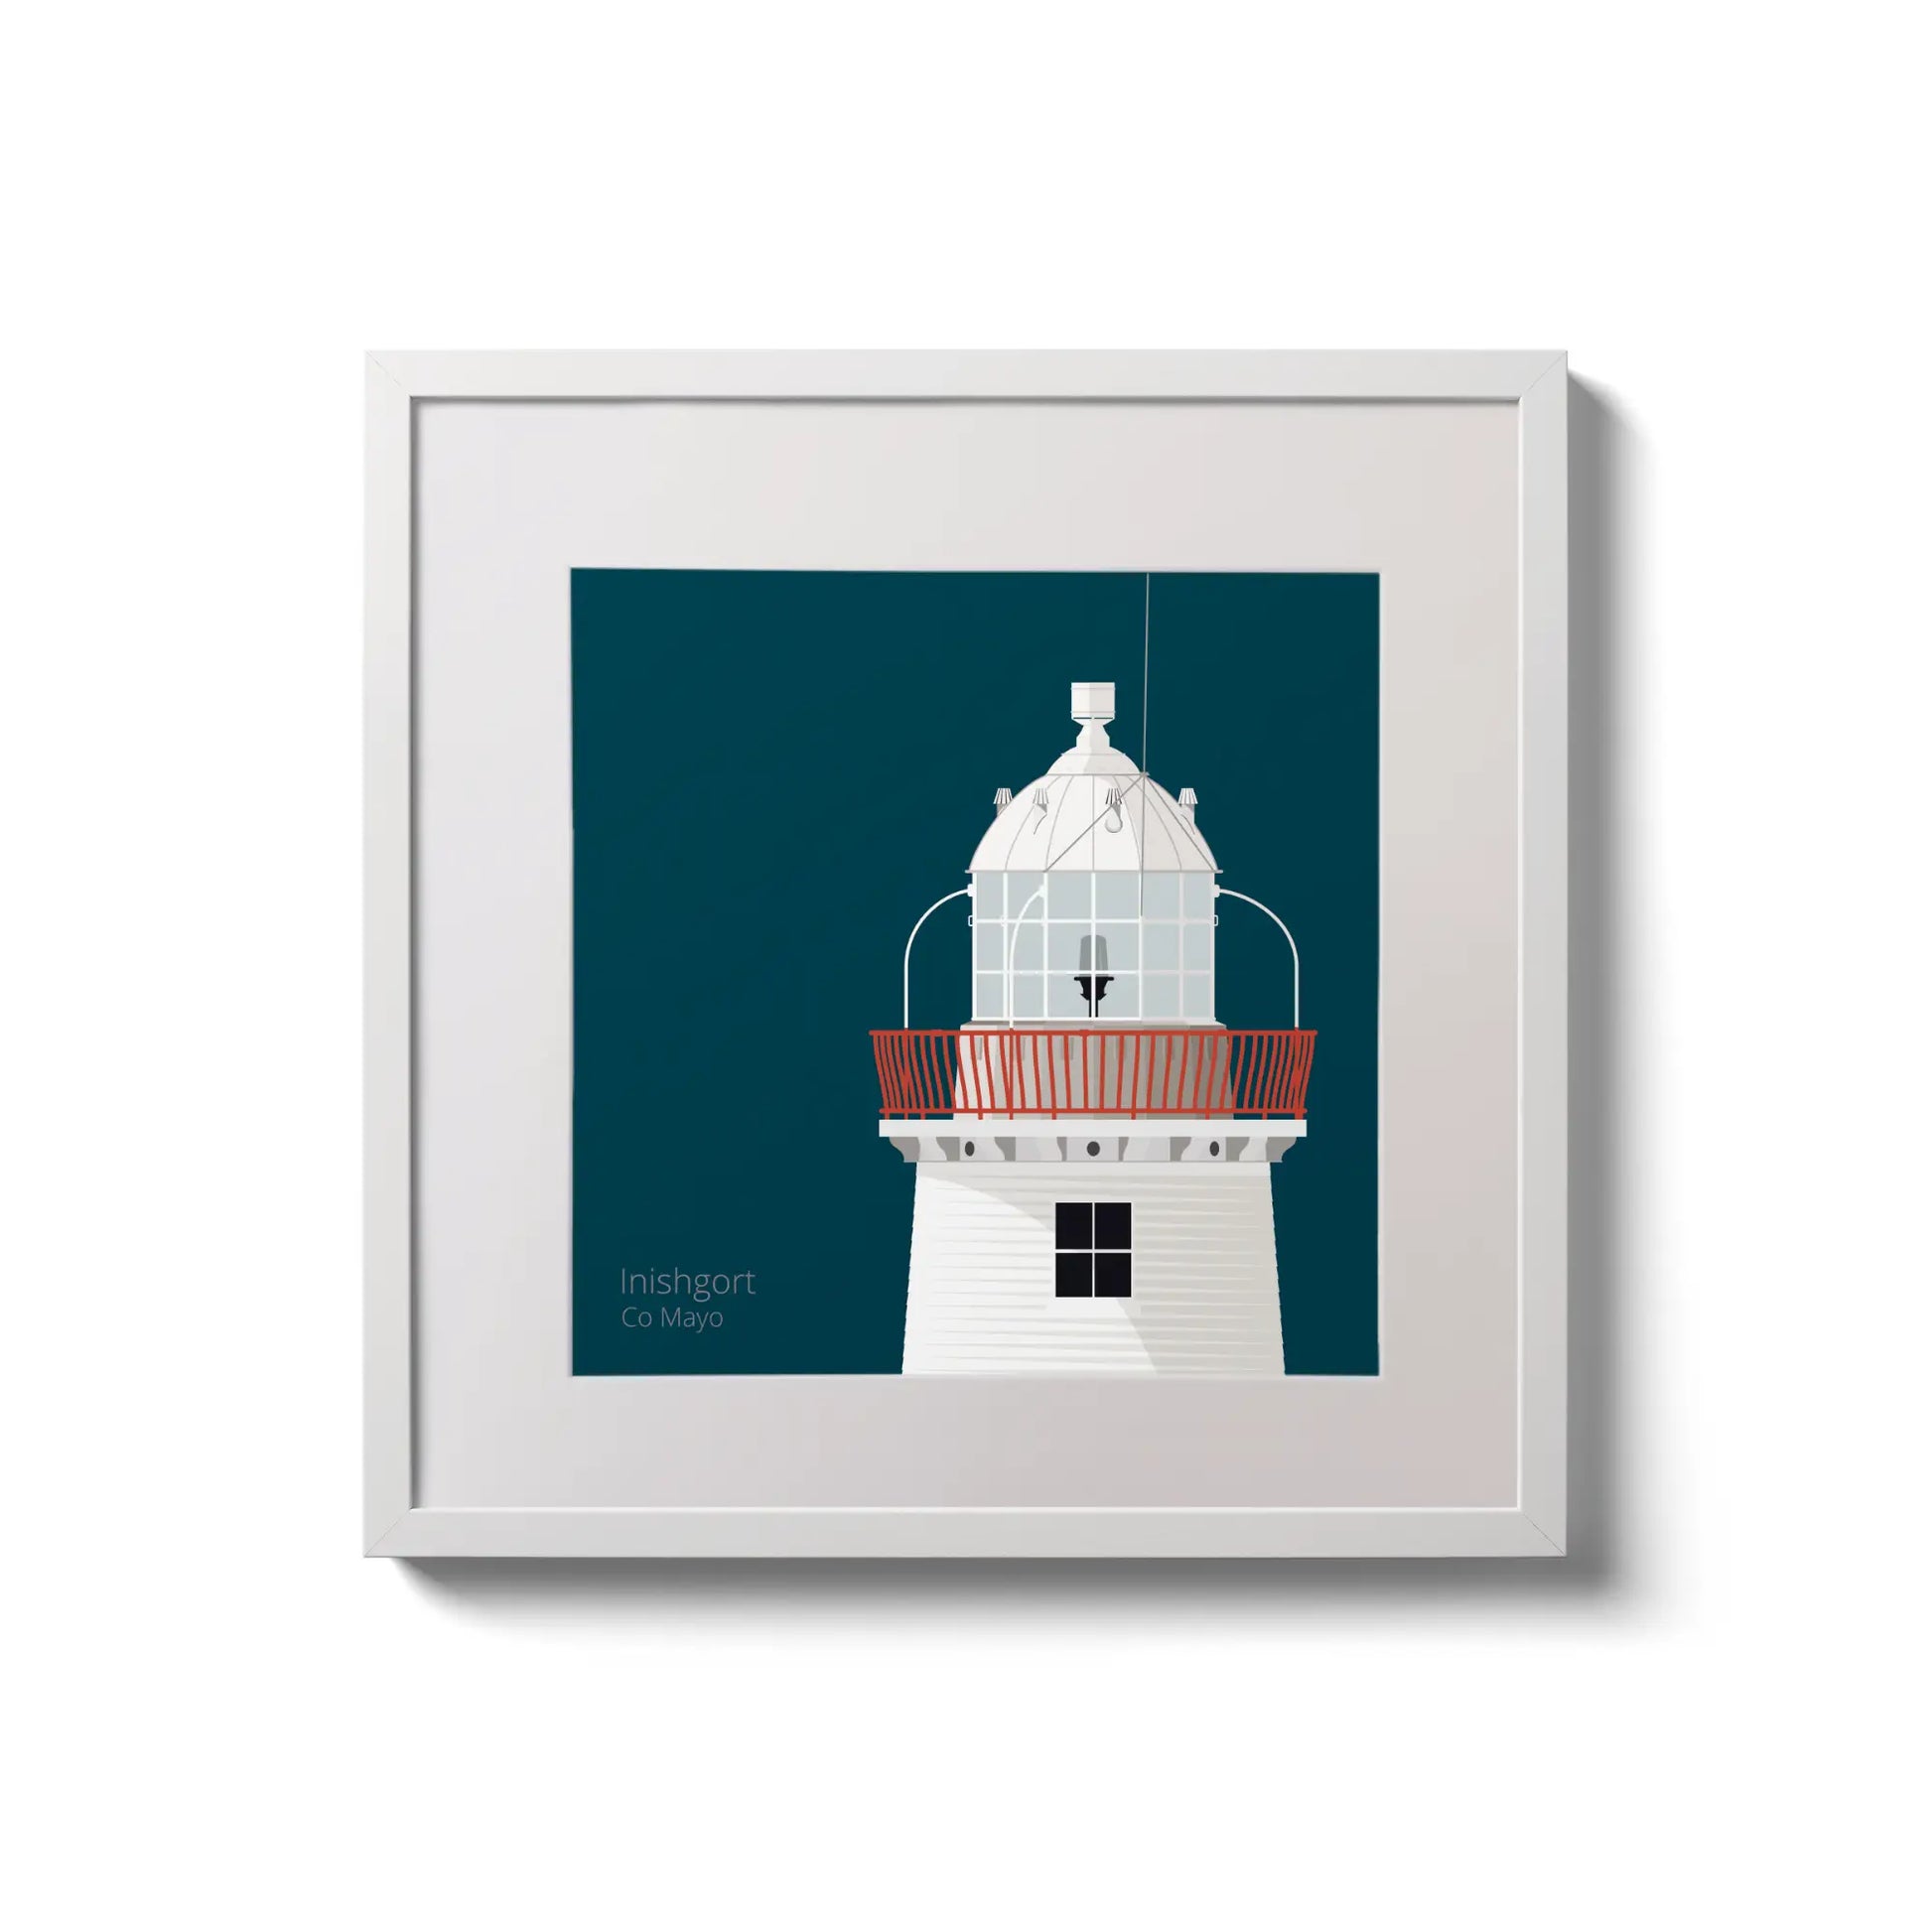 Illustration of Inishgort lighthouse on a midnight blue background,  in a white square frame measuring 20x20cm.